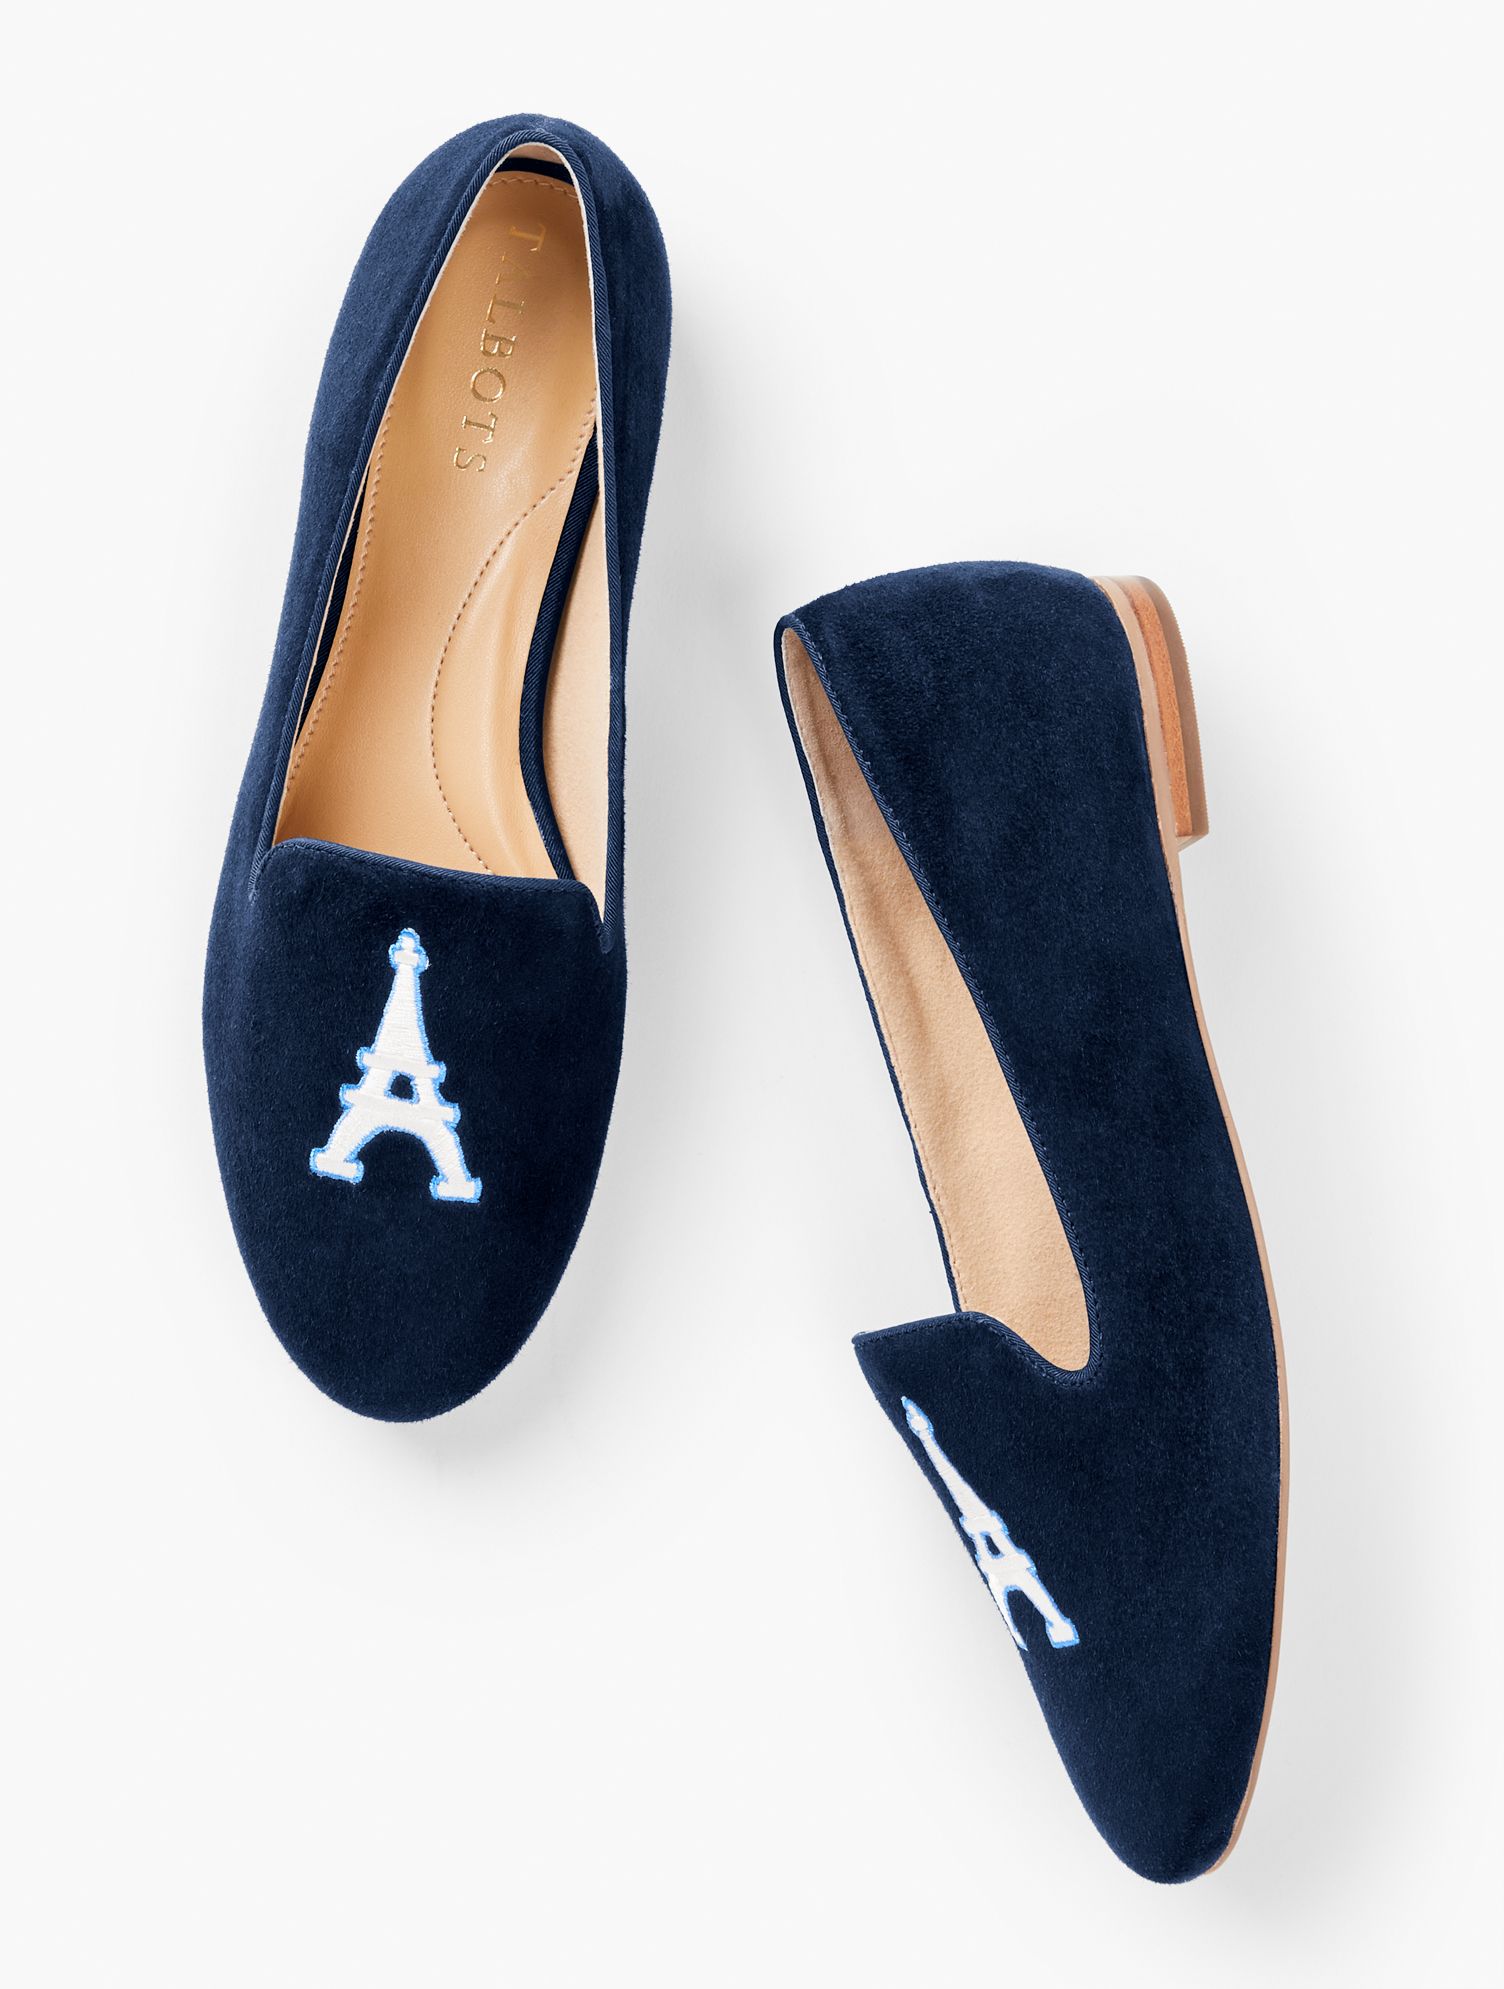 Ryan Embroidered Suede Loafers - Blue - 6M Talbots | Talbots